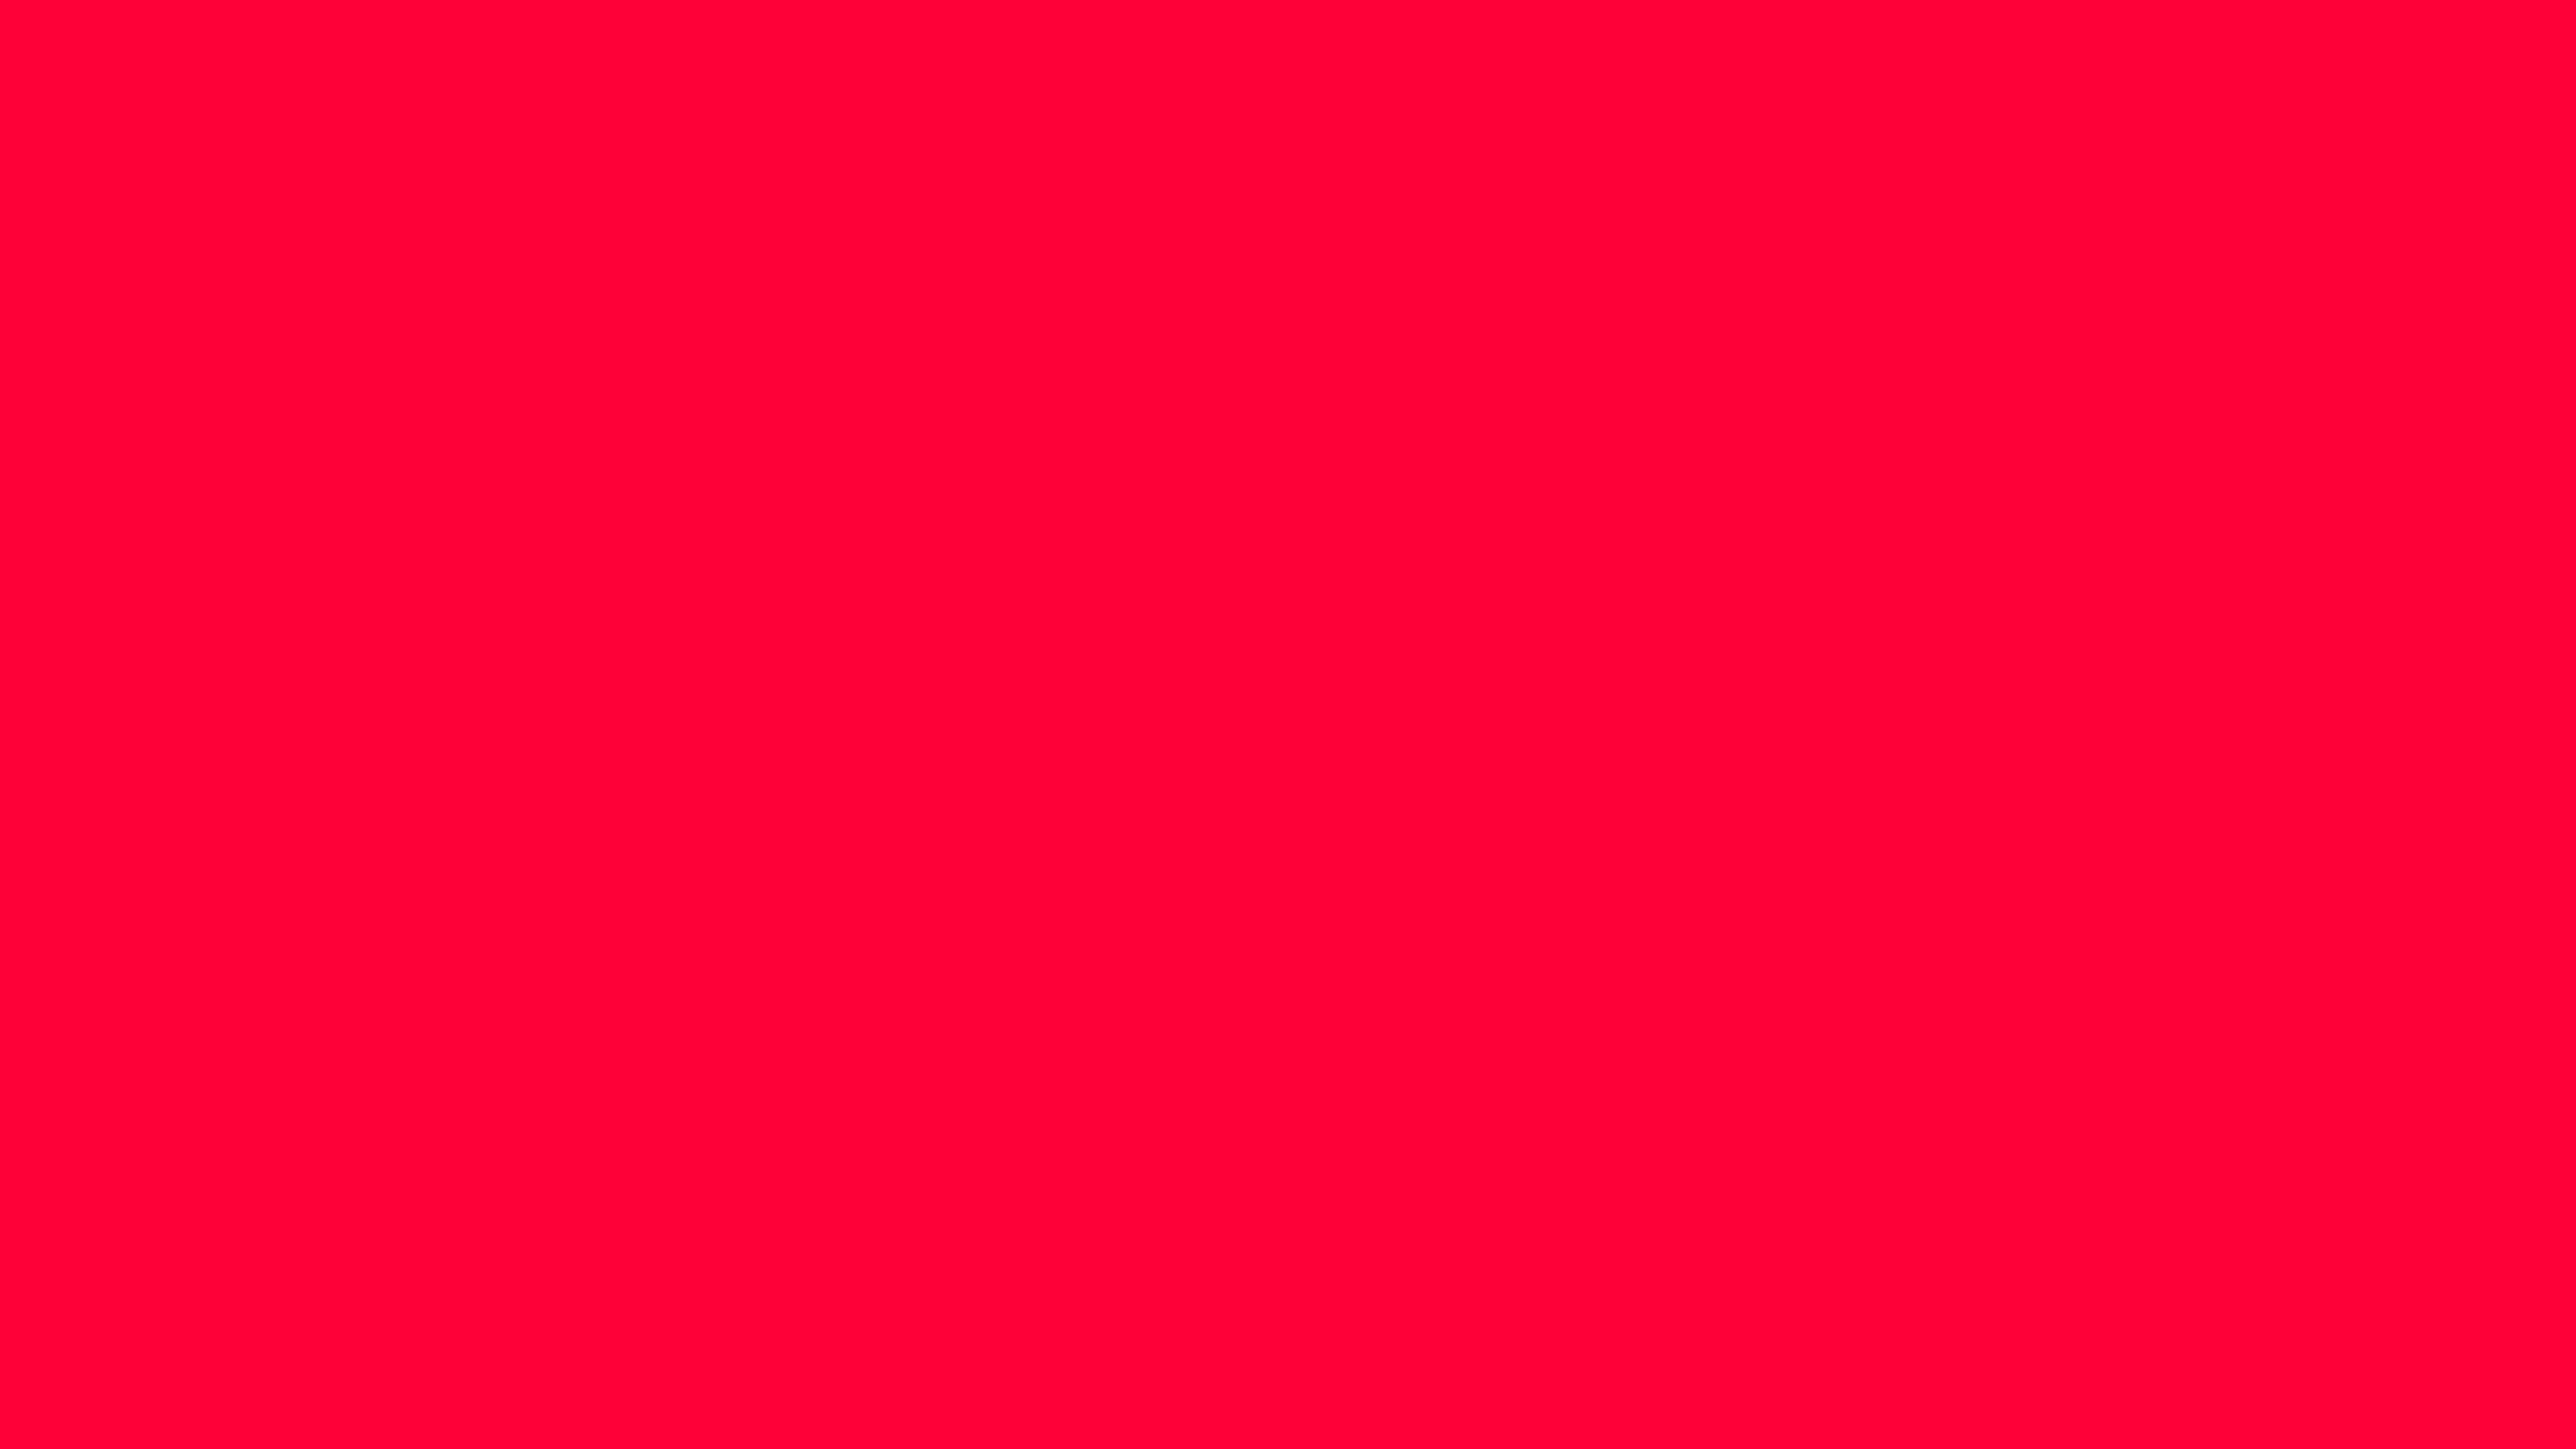 4096x2304 Carmine Red Solid Color Background